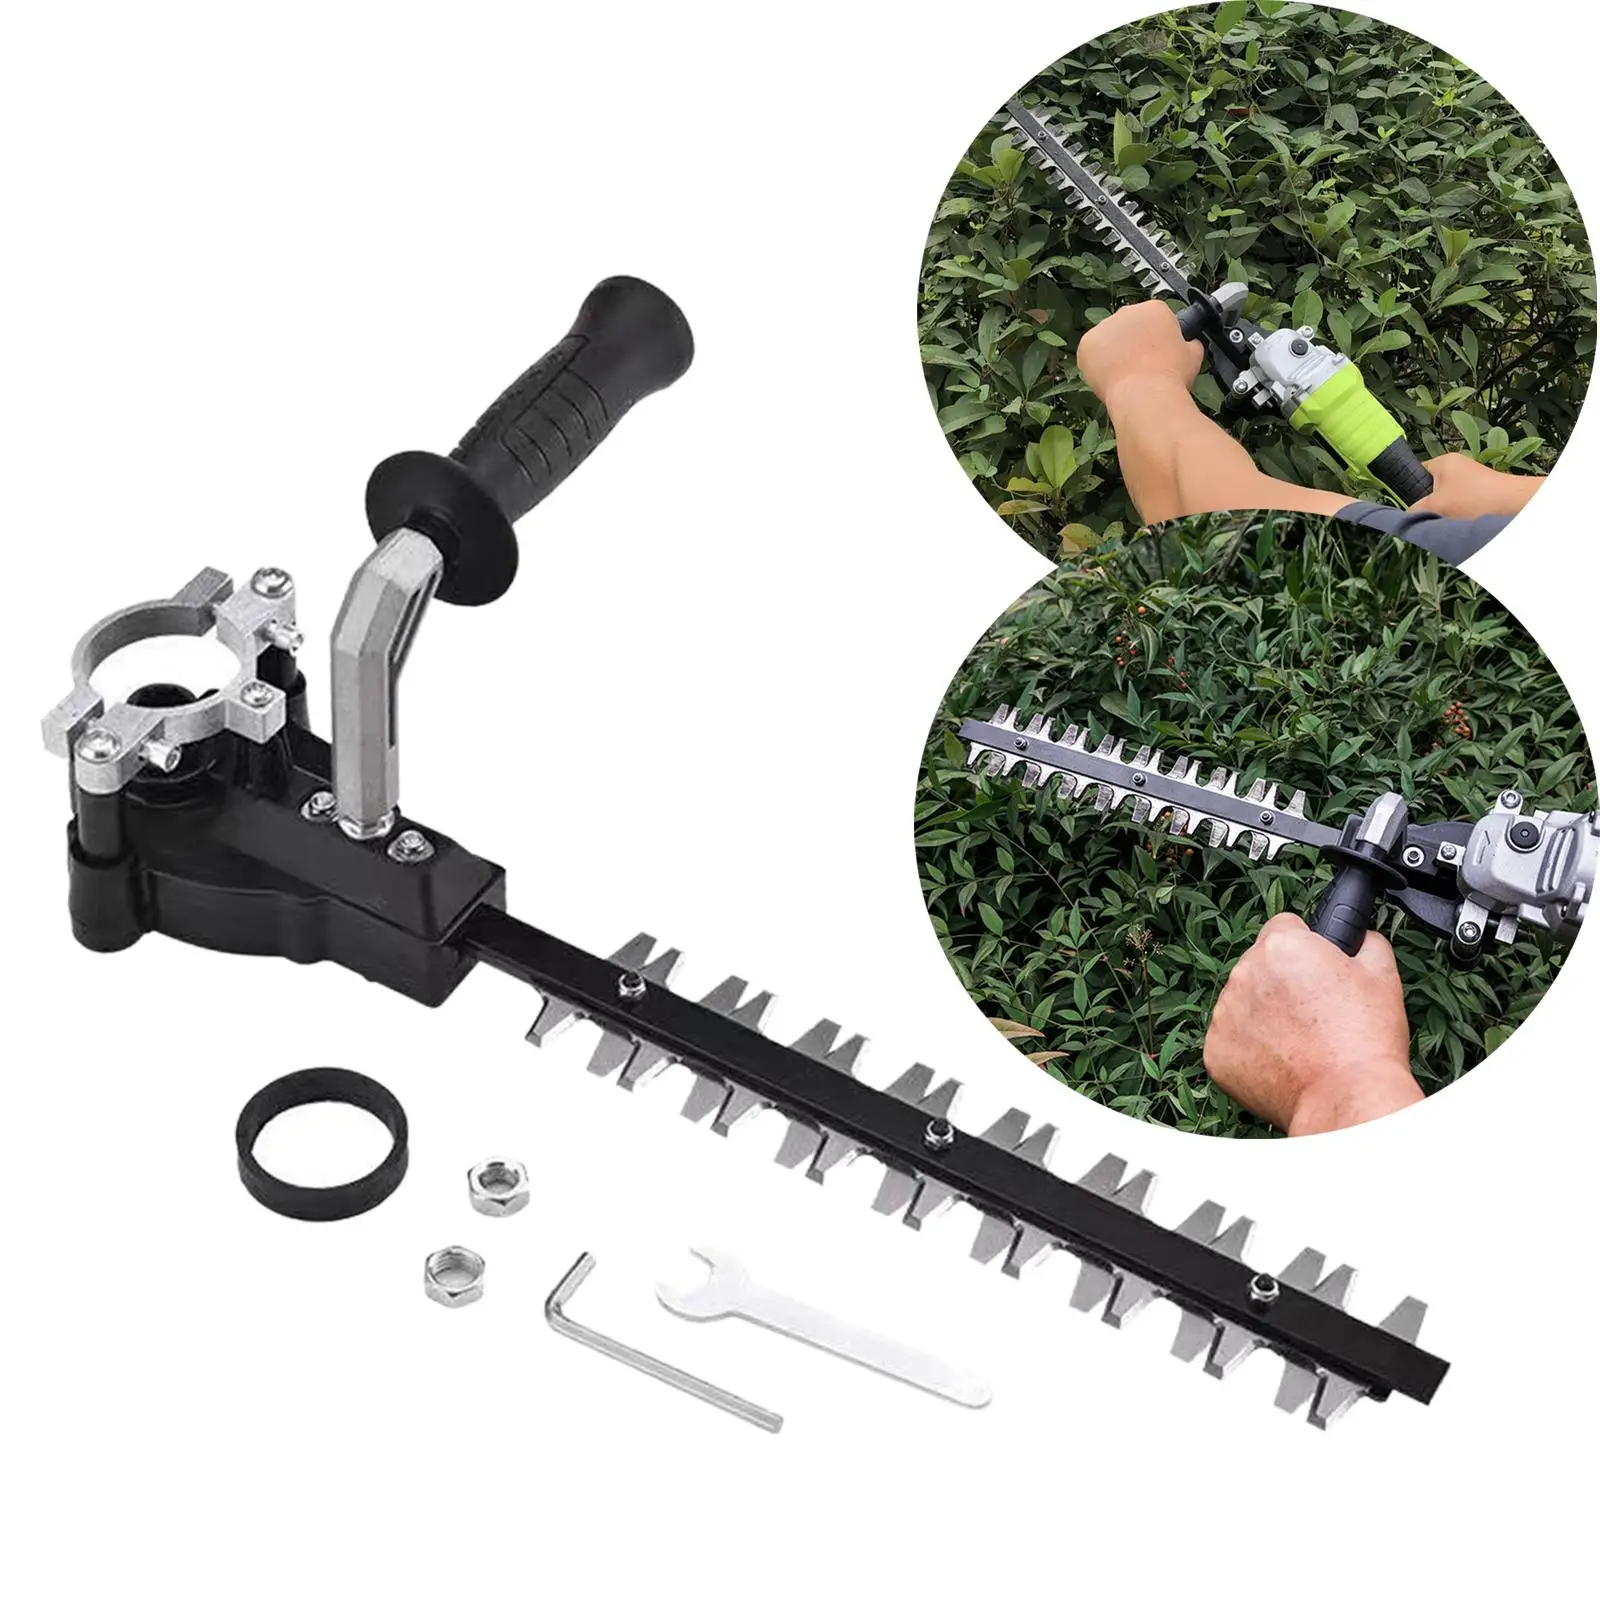 Electric Hedge Trimmer Powerful Lightweight Branch Trimmers Cutter Accessories Hedge Clipper Handheld Trimmer for Yard Bush Lawn